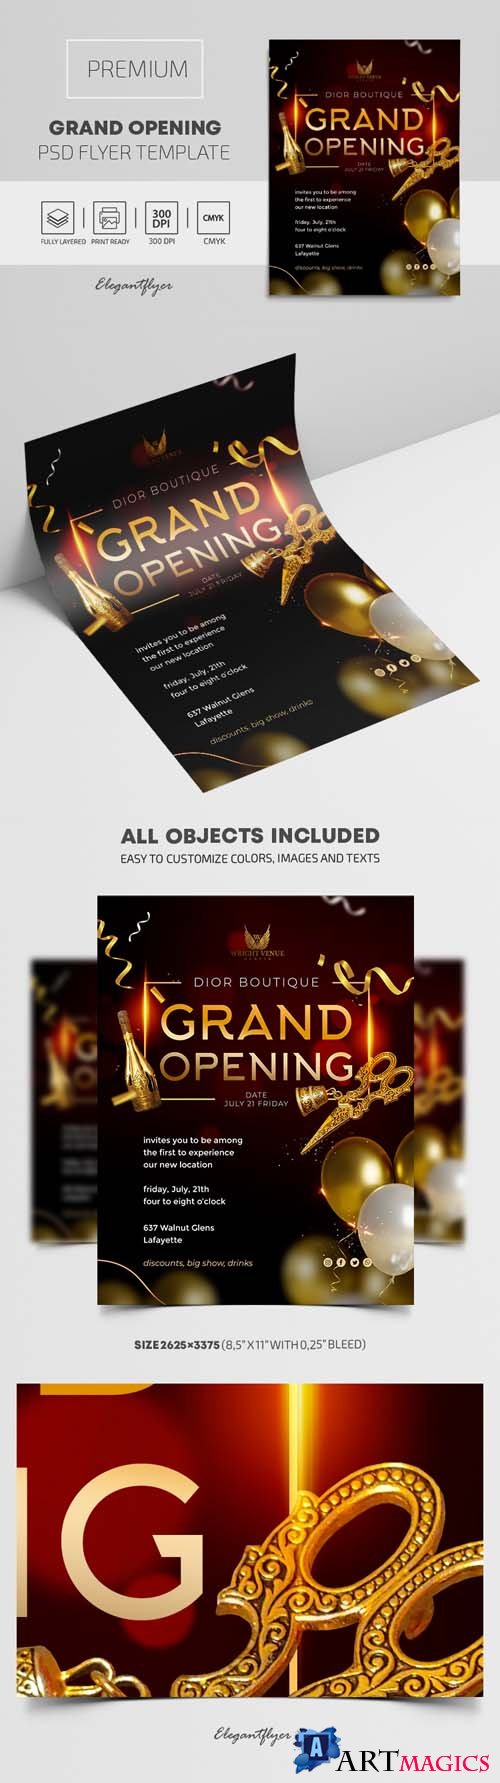 Grand Opening Premium PSD Flyer Template